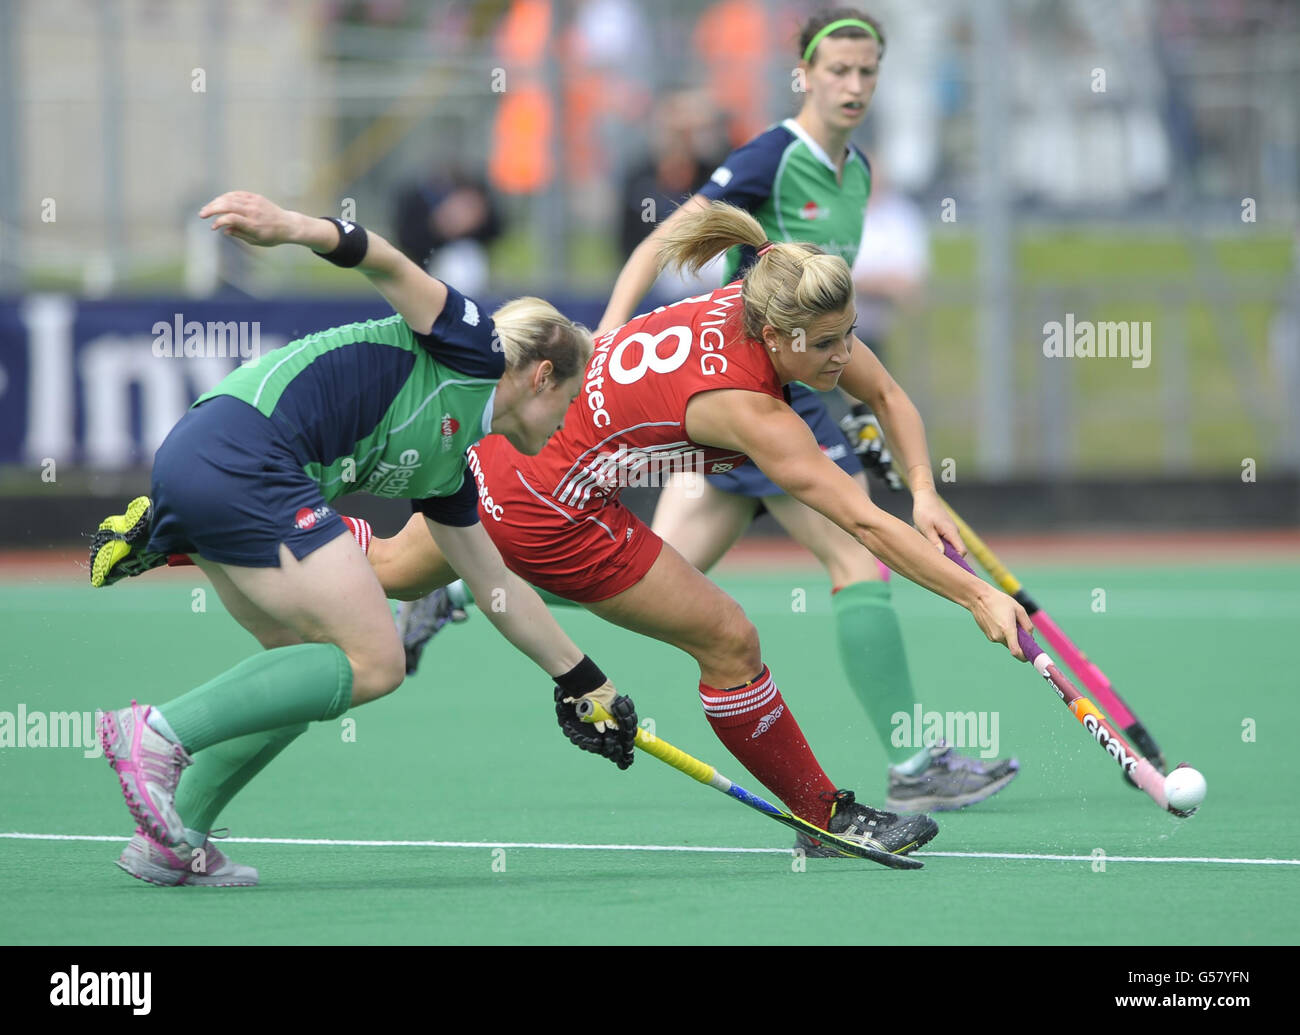 Great Britain's Georgie Twigg challenges with Ireland's Nicola Symmons during their 5th/6th place playoff in the Investec London Cup at the Quintin Hogg Memorial Ground, Chiswick West London. Stock Photo